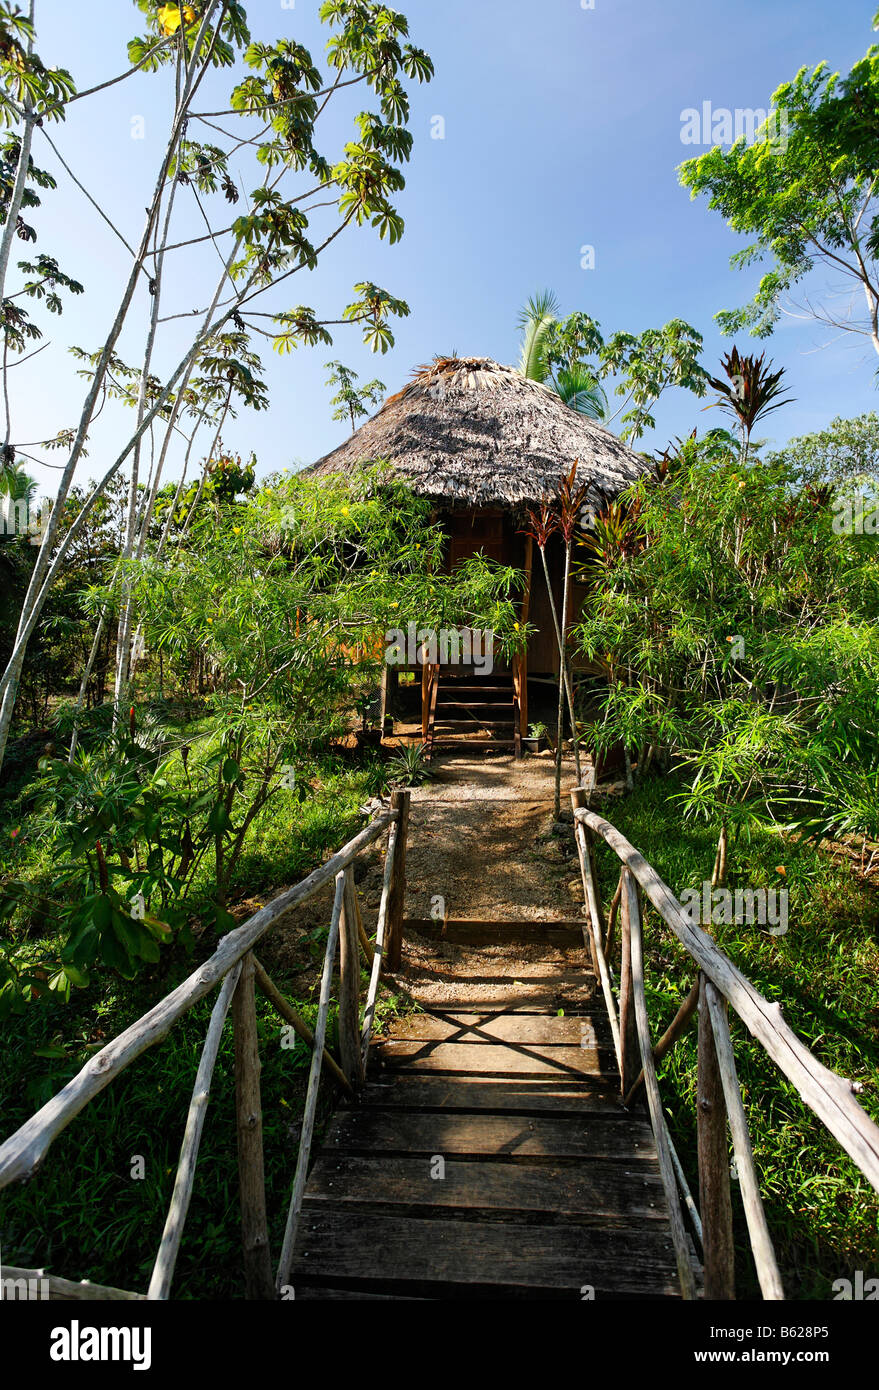 Bungalow with a thatched roof in the tropical forest, flimsy wooden bridge, Punta Gorda, Belize, Central America, Caribbean Stock Photo